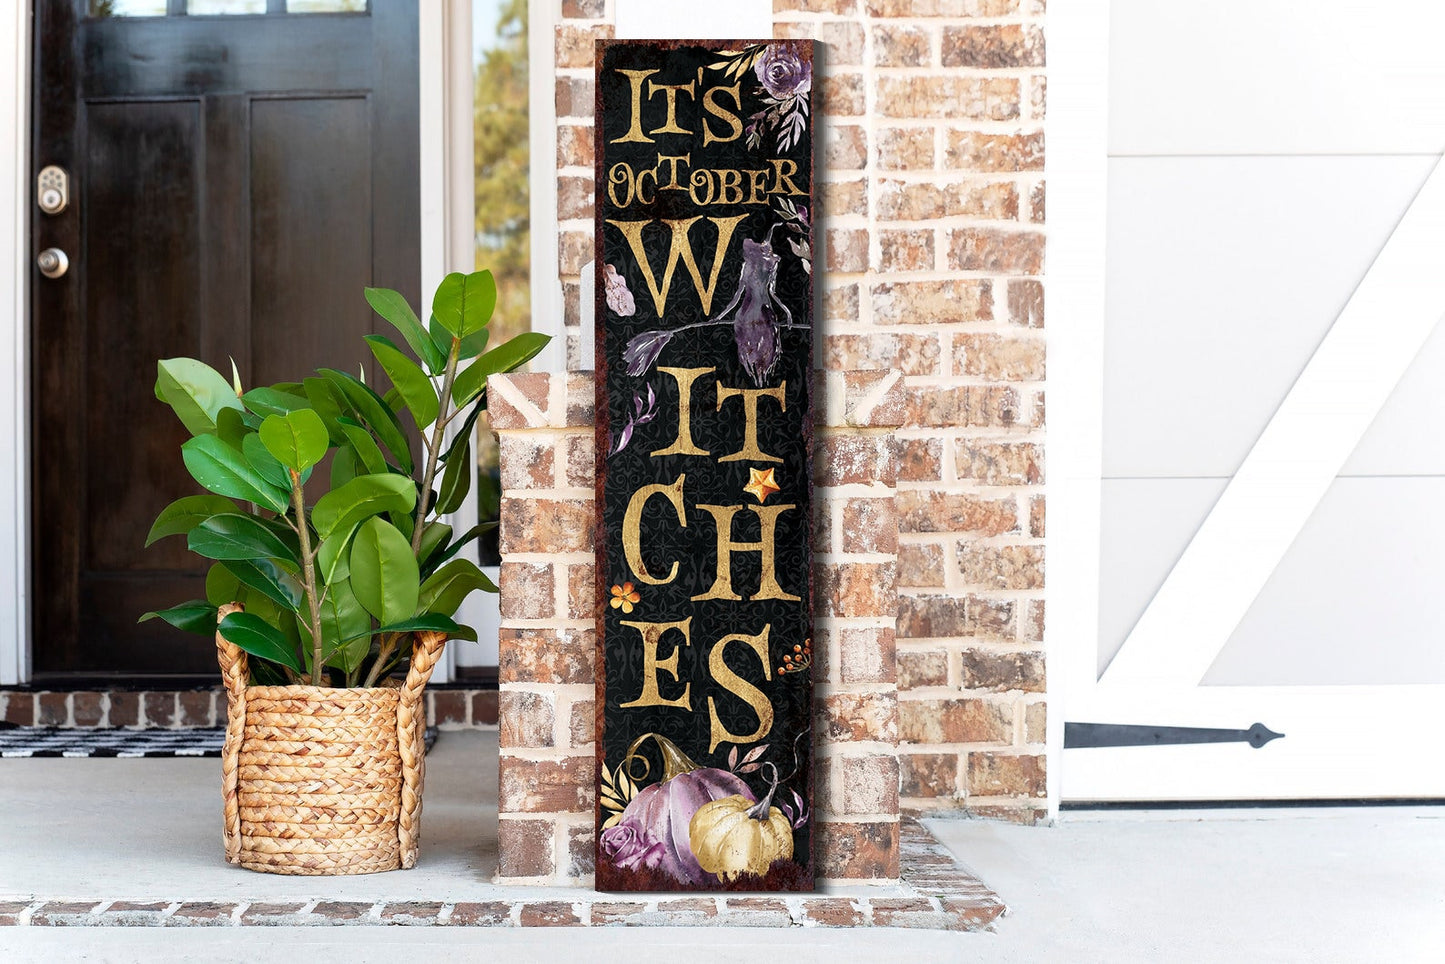 36in "It's October Witches" Halloween Porch Sign - Front Porch Halloween Welcome Sign, Rustic Modern Farmhouse Entryway Decor